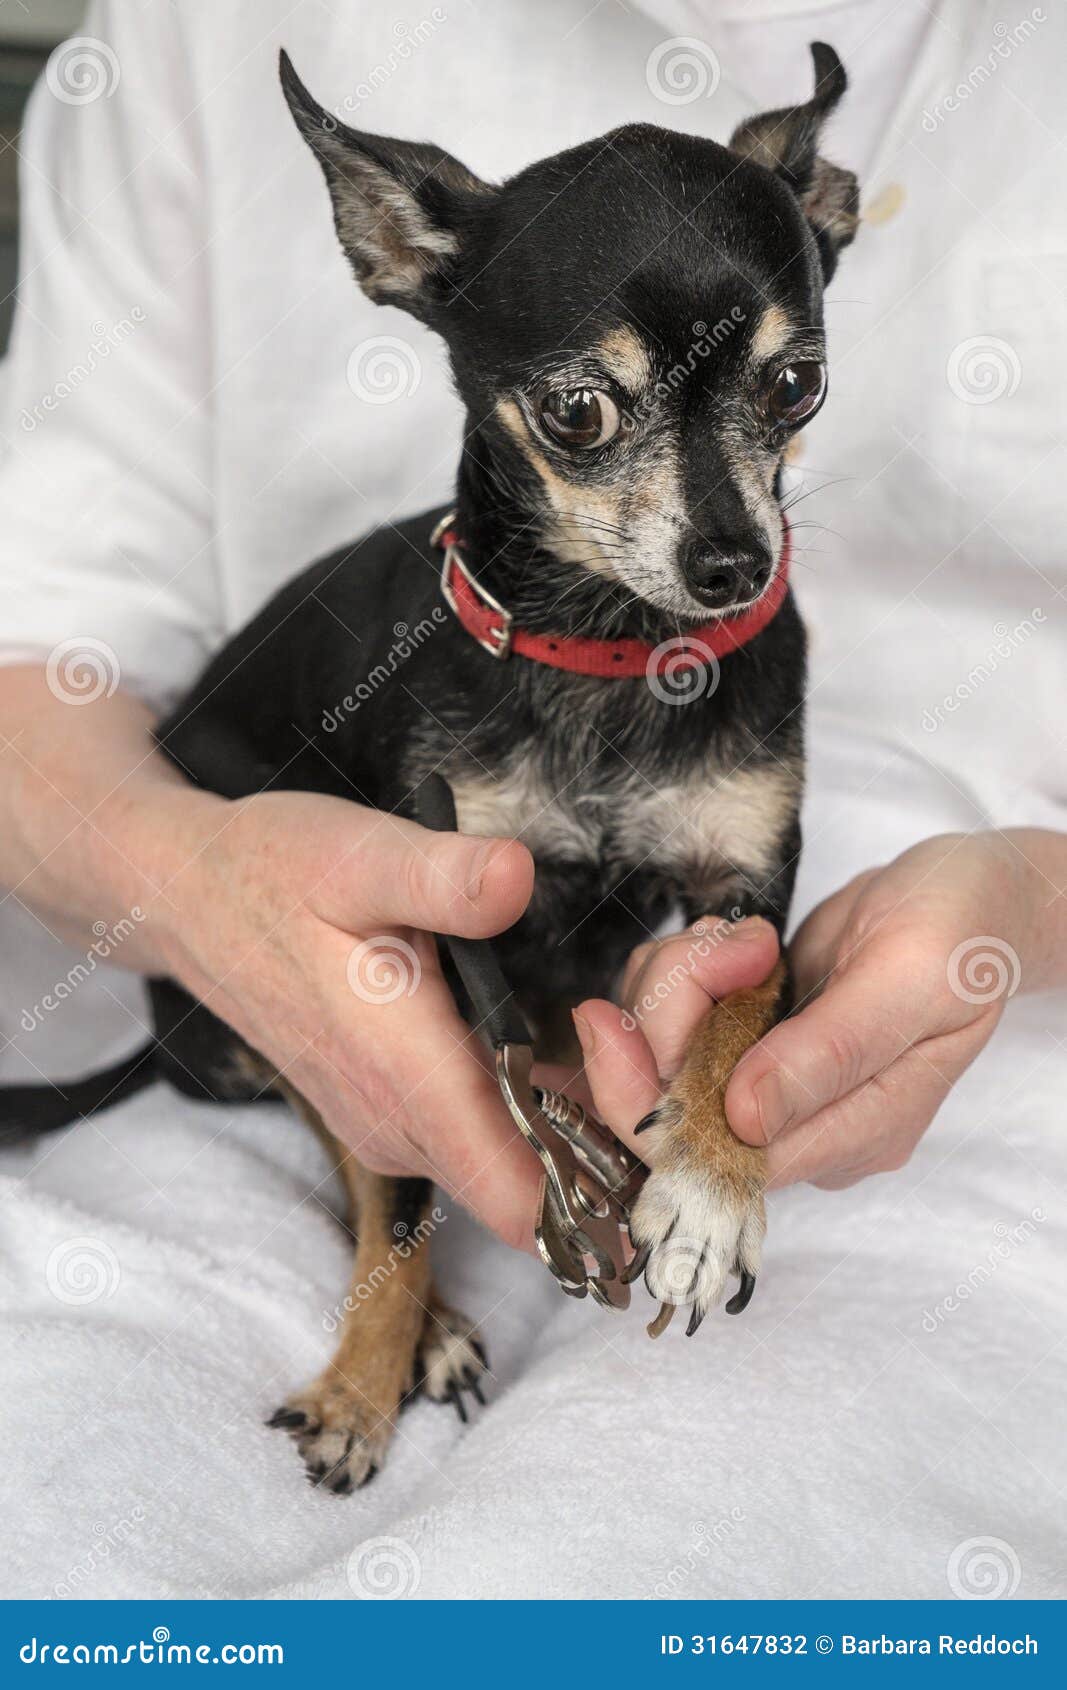 Trimming Chihuahua S Toenails Or Claws Stock Photo Image